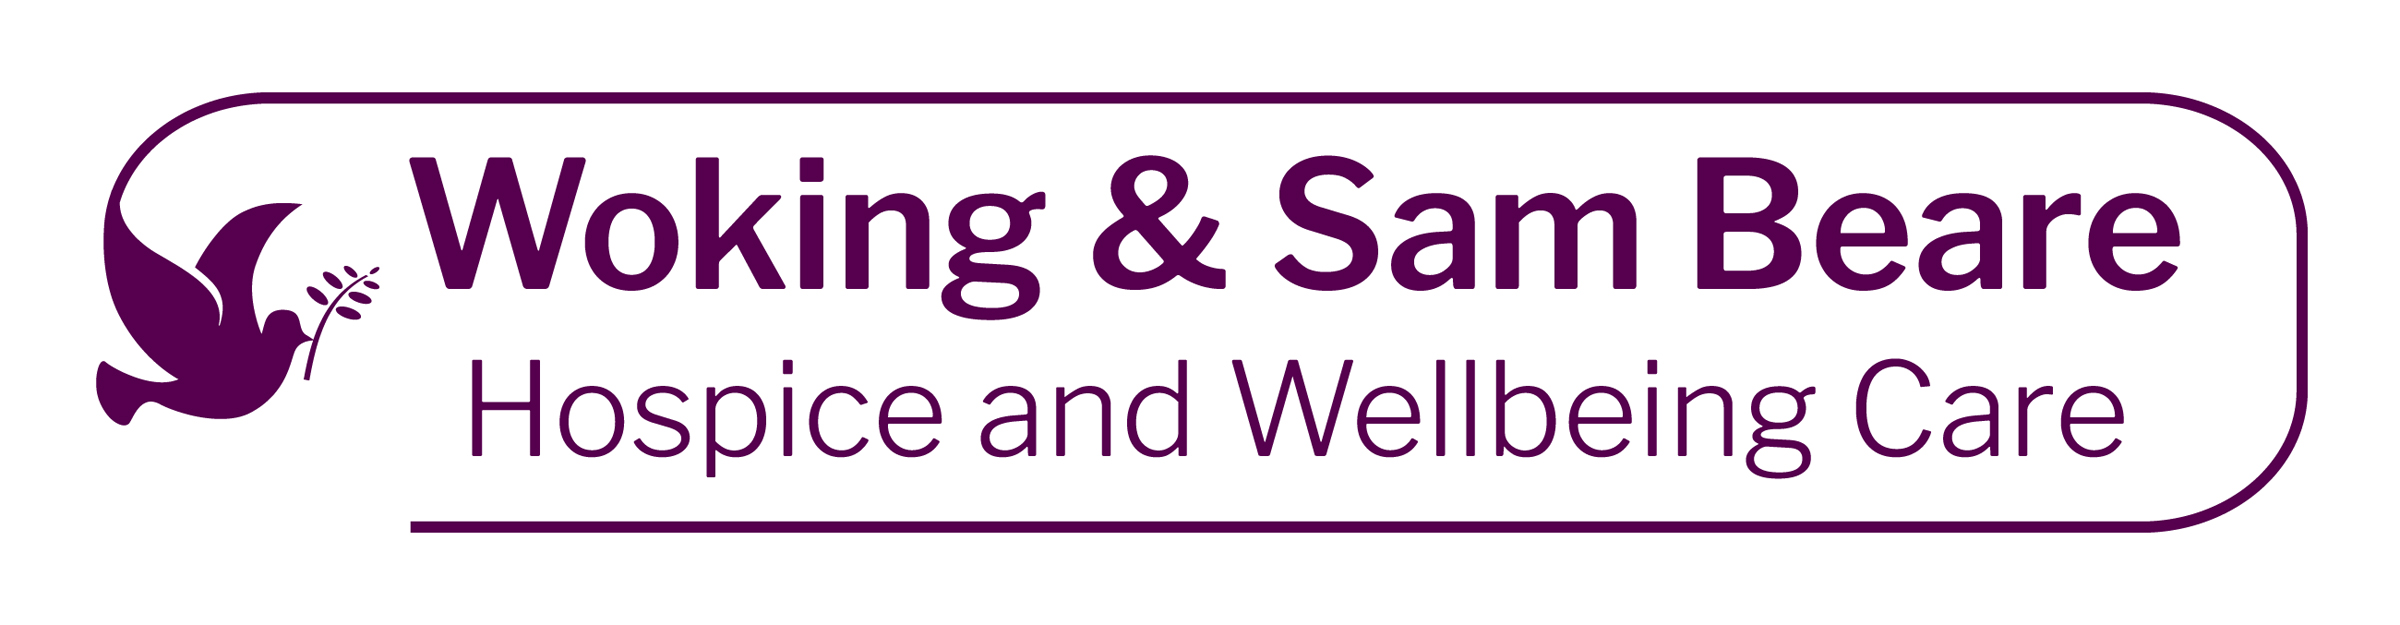 Woking and Sam Beare Hospice and Wellbeing Care